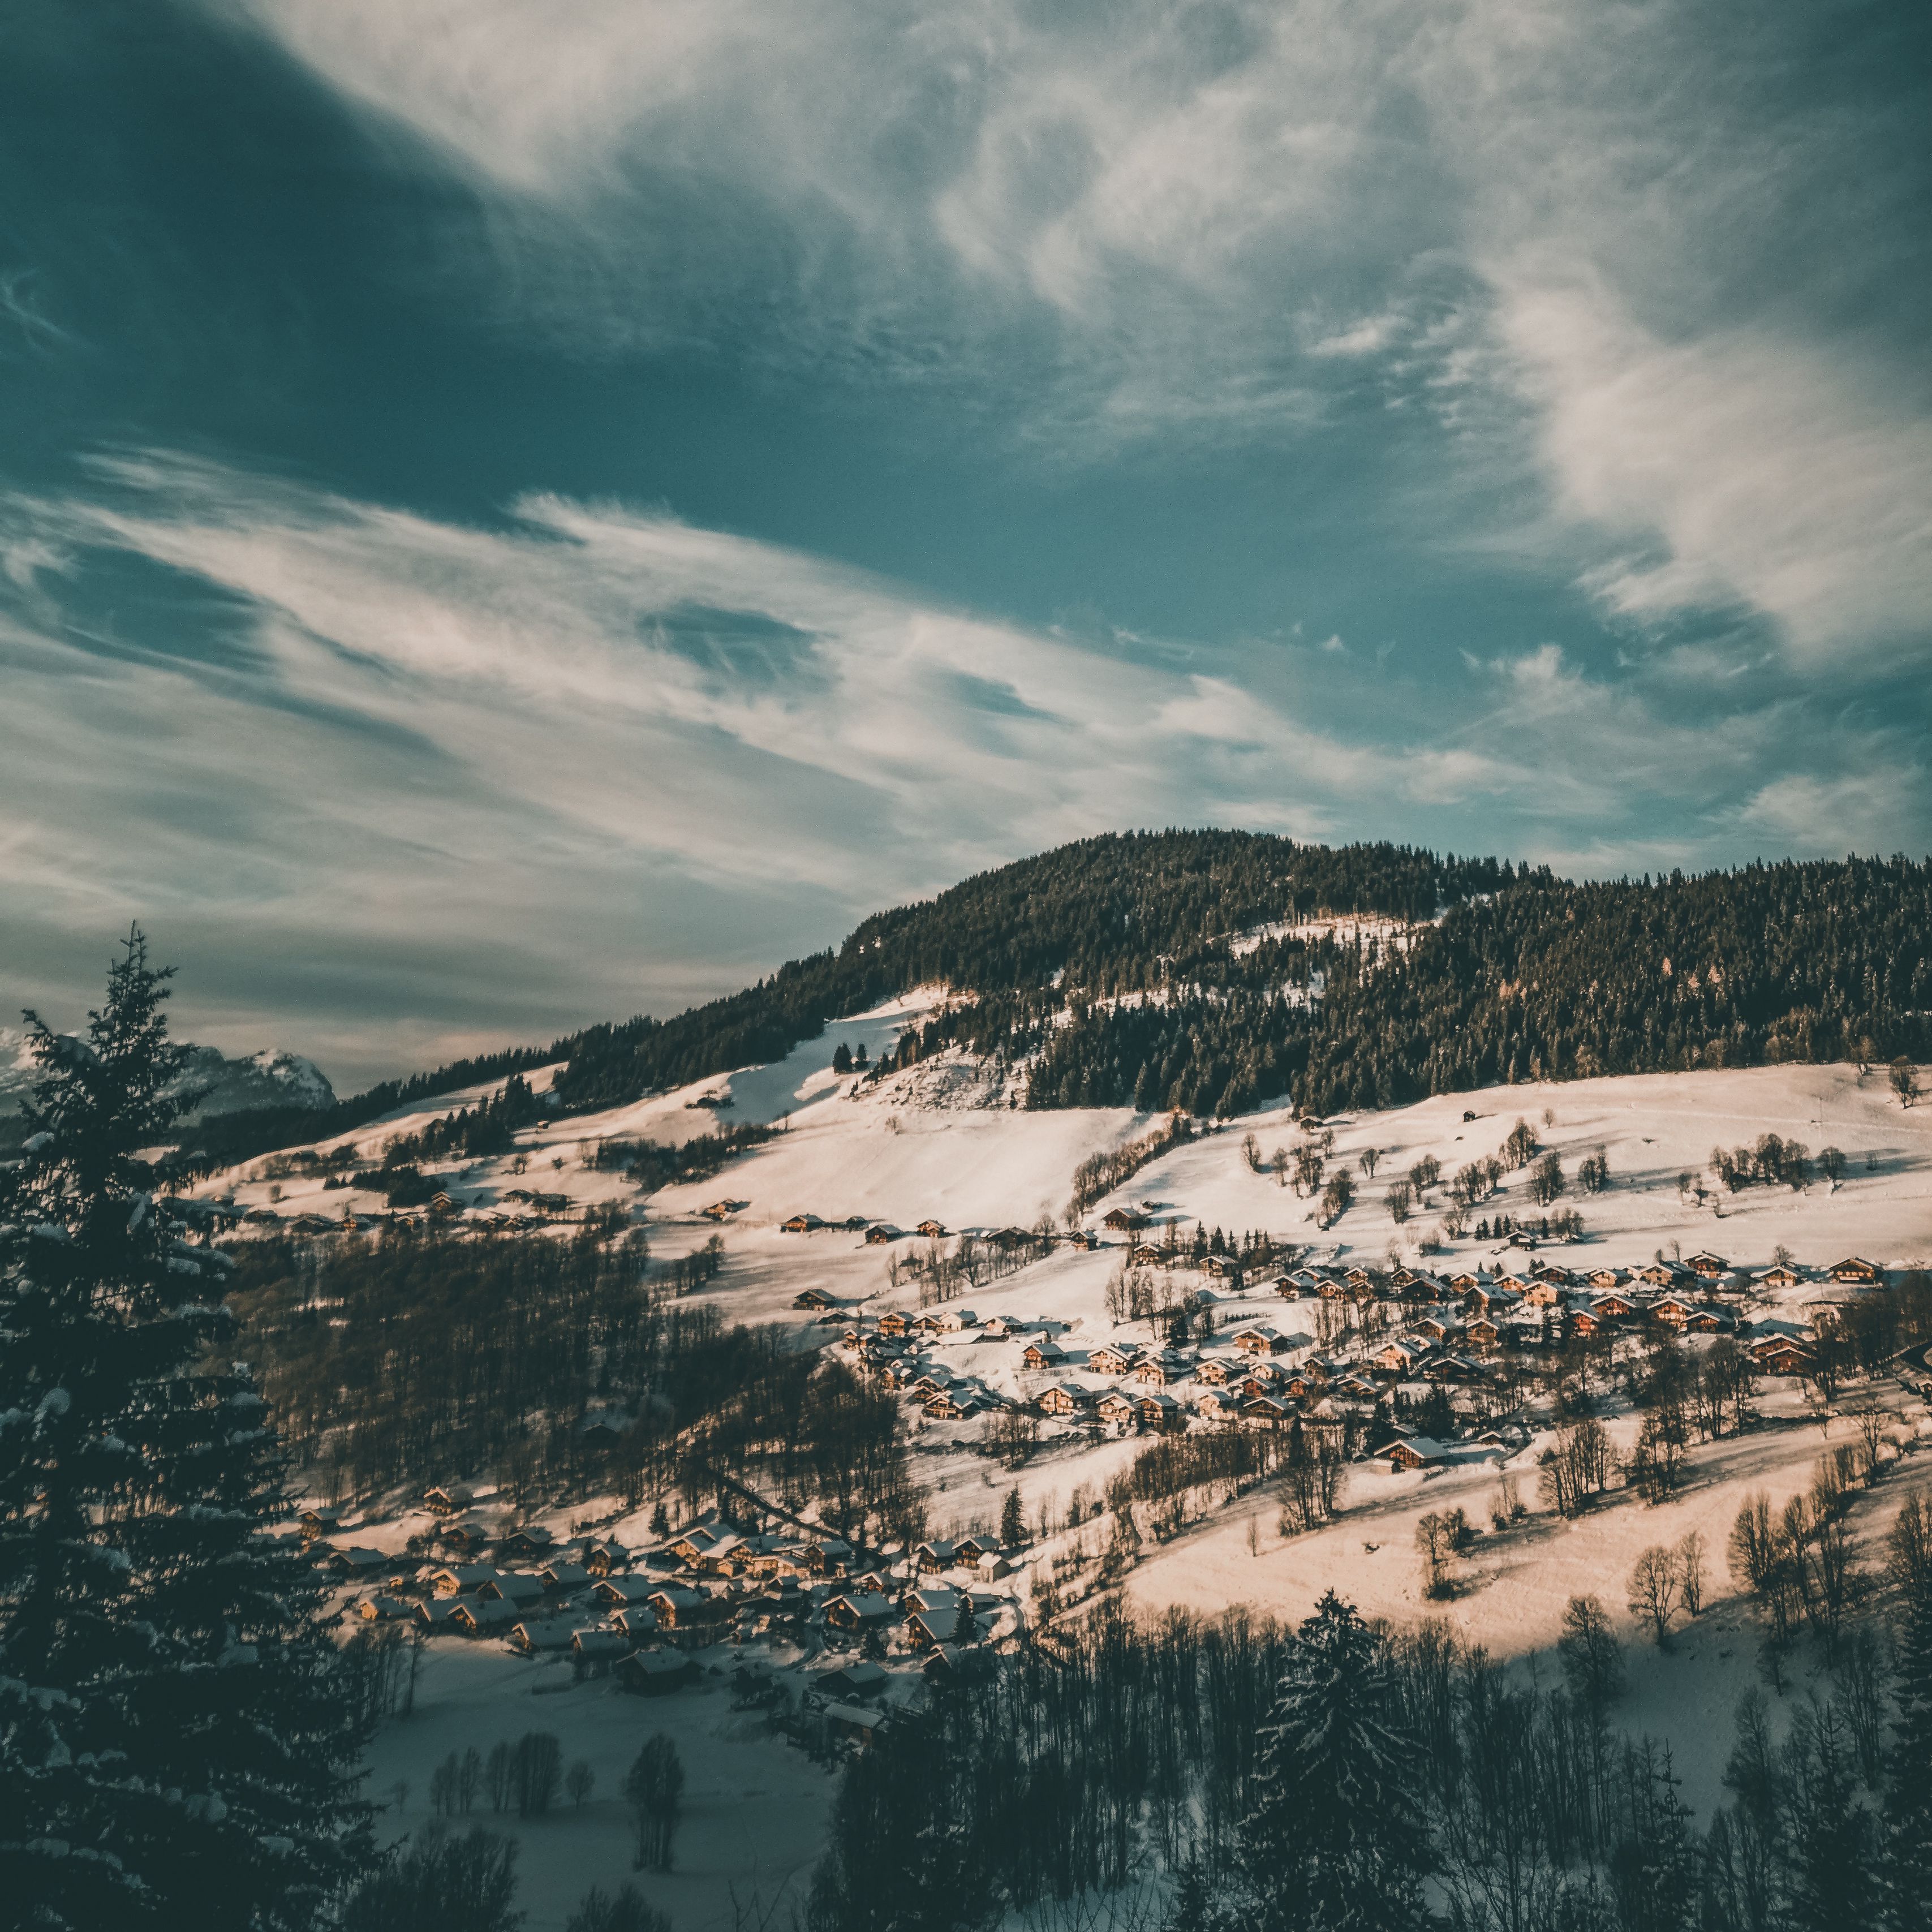 Download wallpapers 3415x3415 winter, forest, village, snow, aerial view, clouds ipad pro 12.9 retina for parallax hd backgrounds